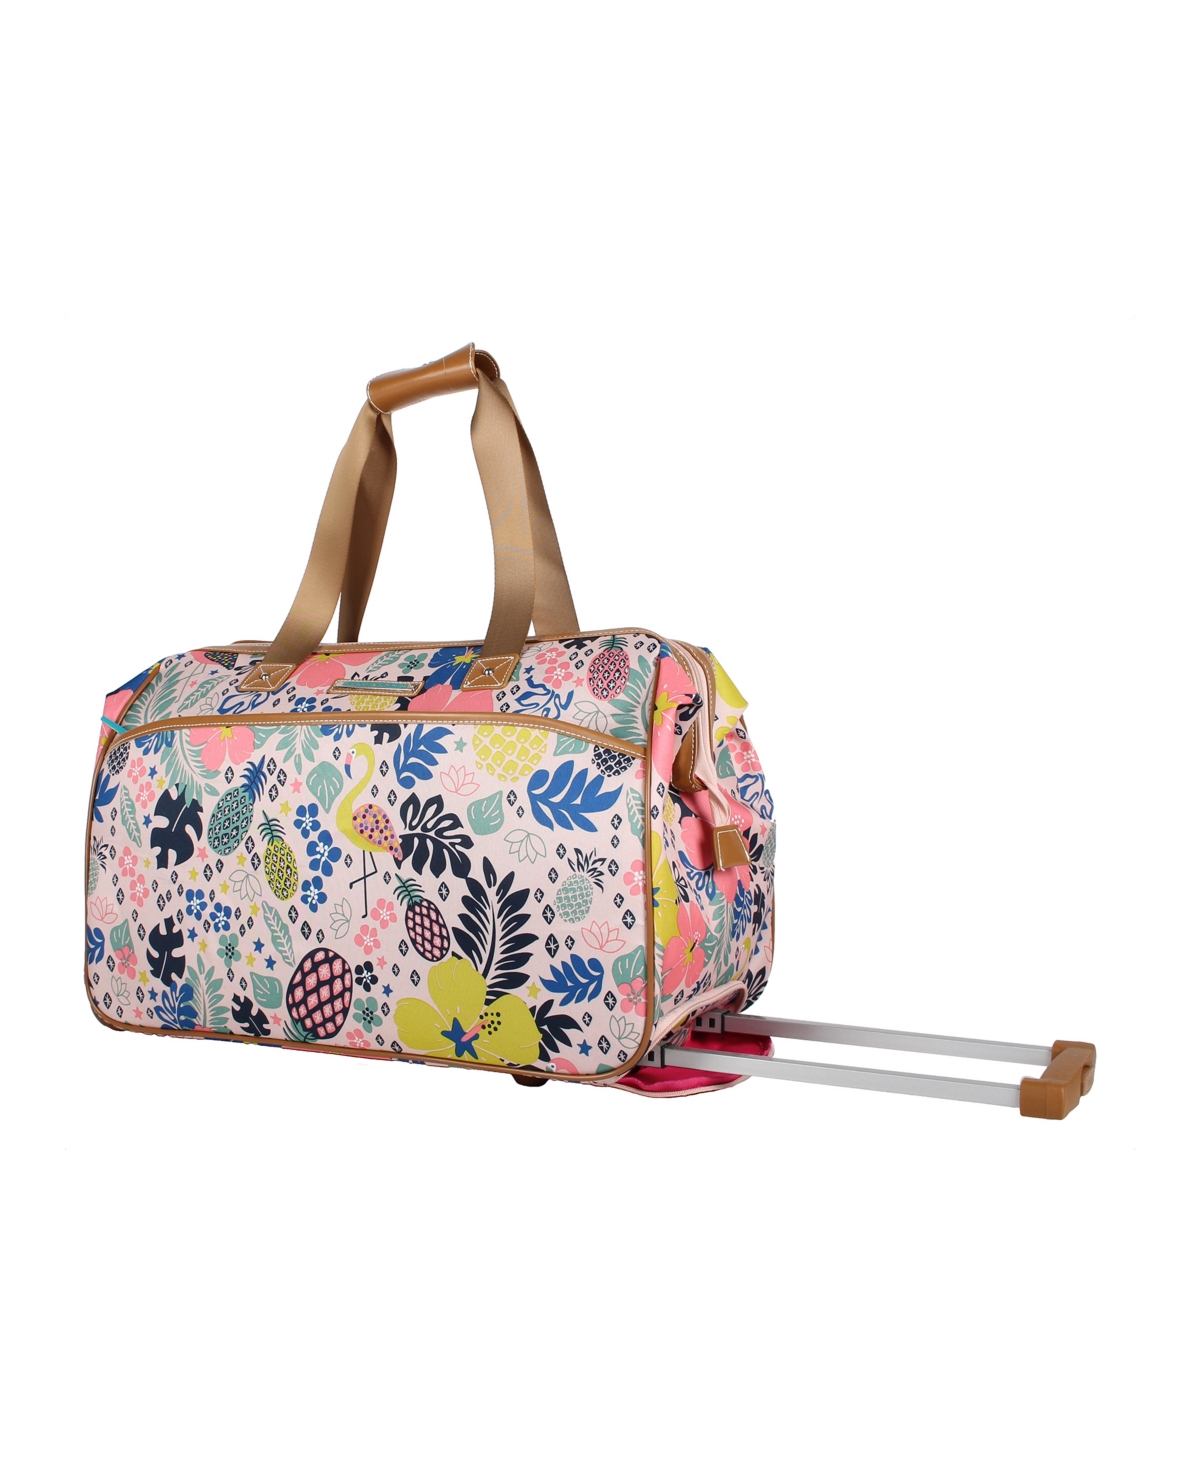 Lily Bloom Carry-on Softside Rolling Duffel Bag In Trop Pineapple